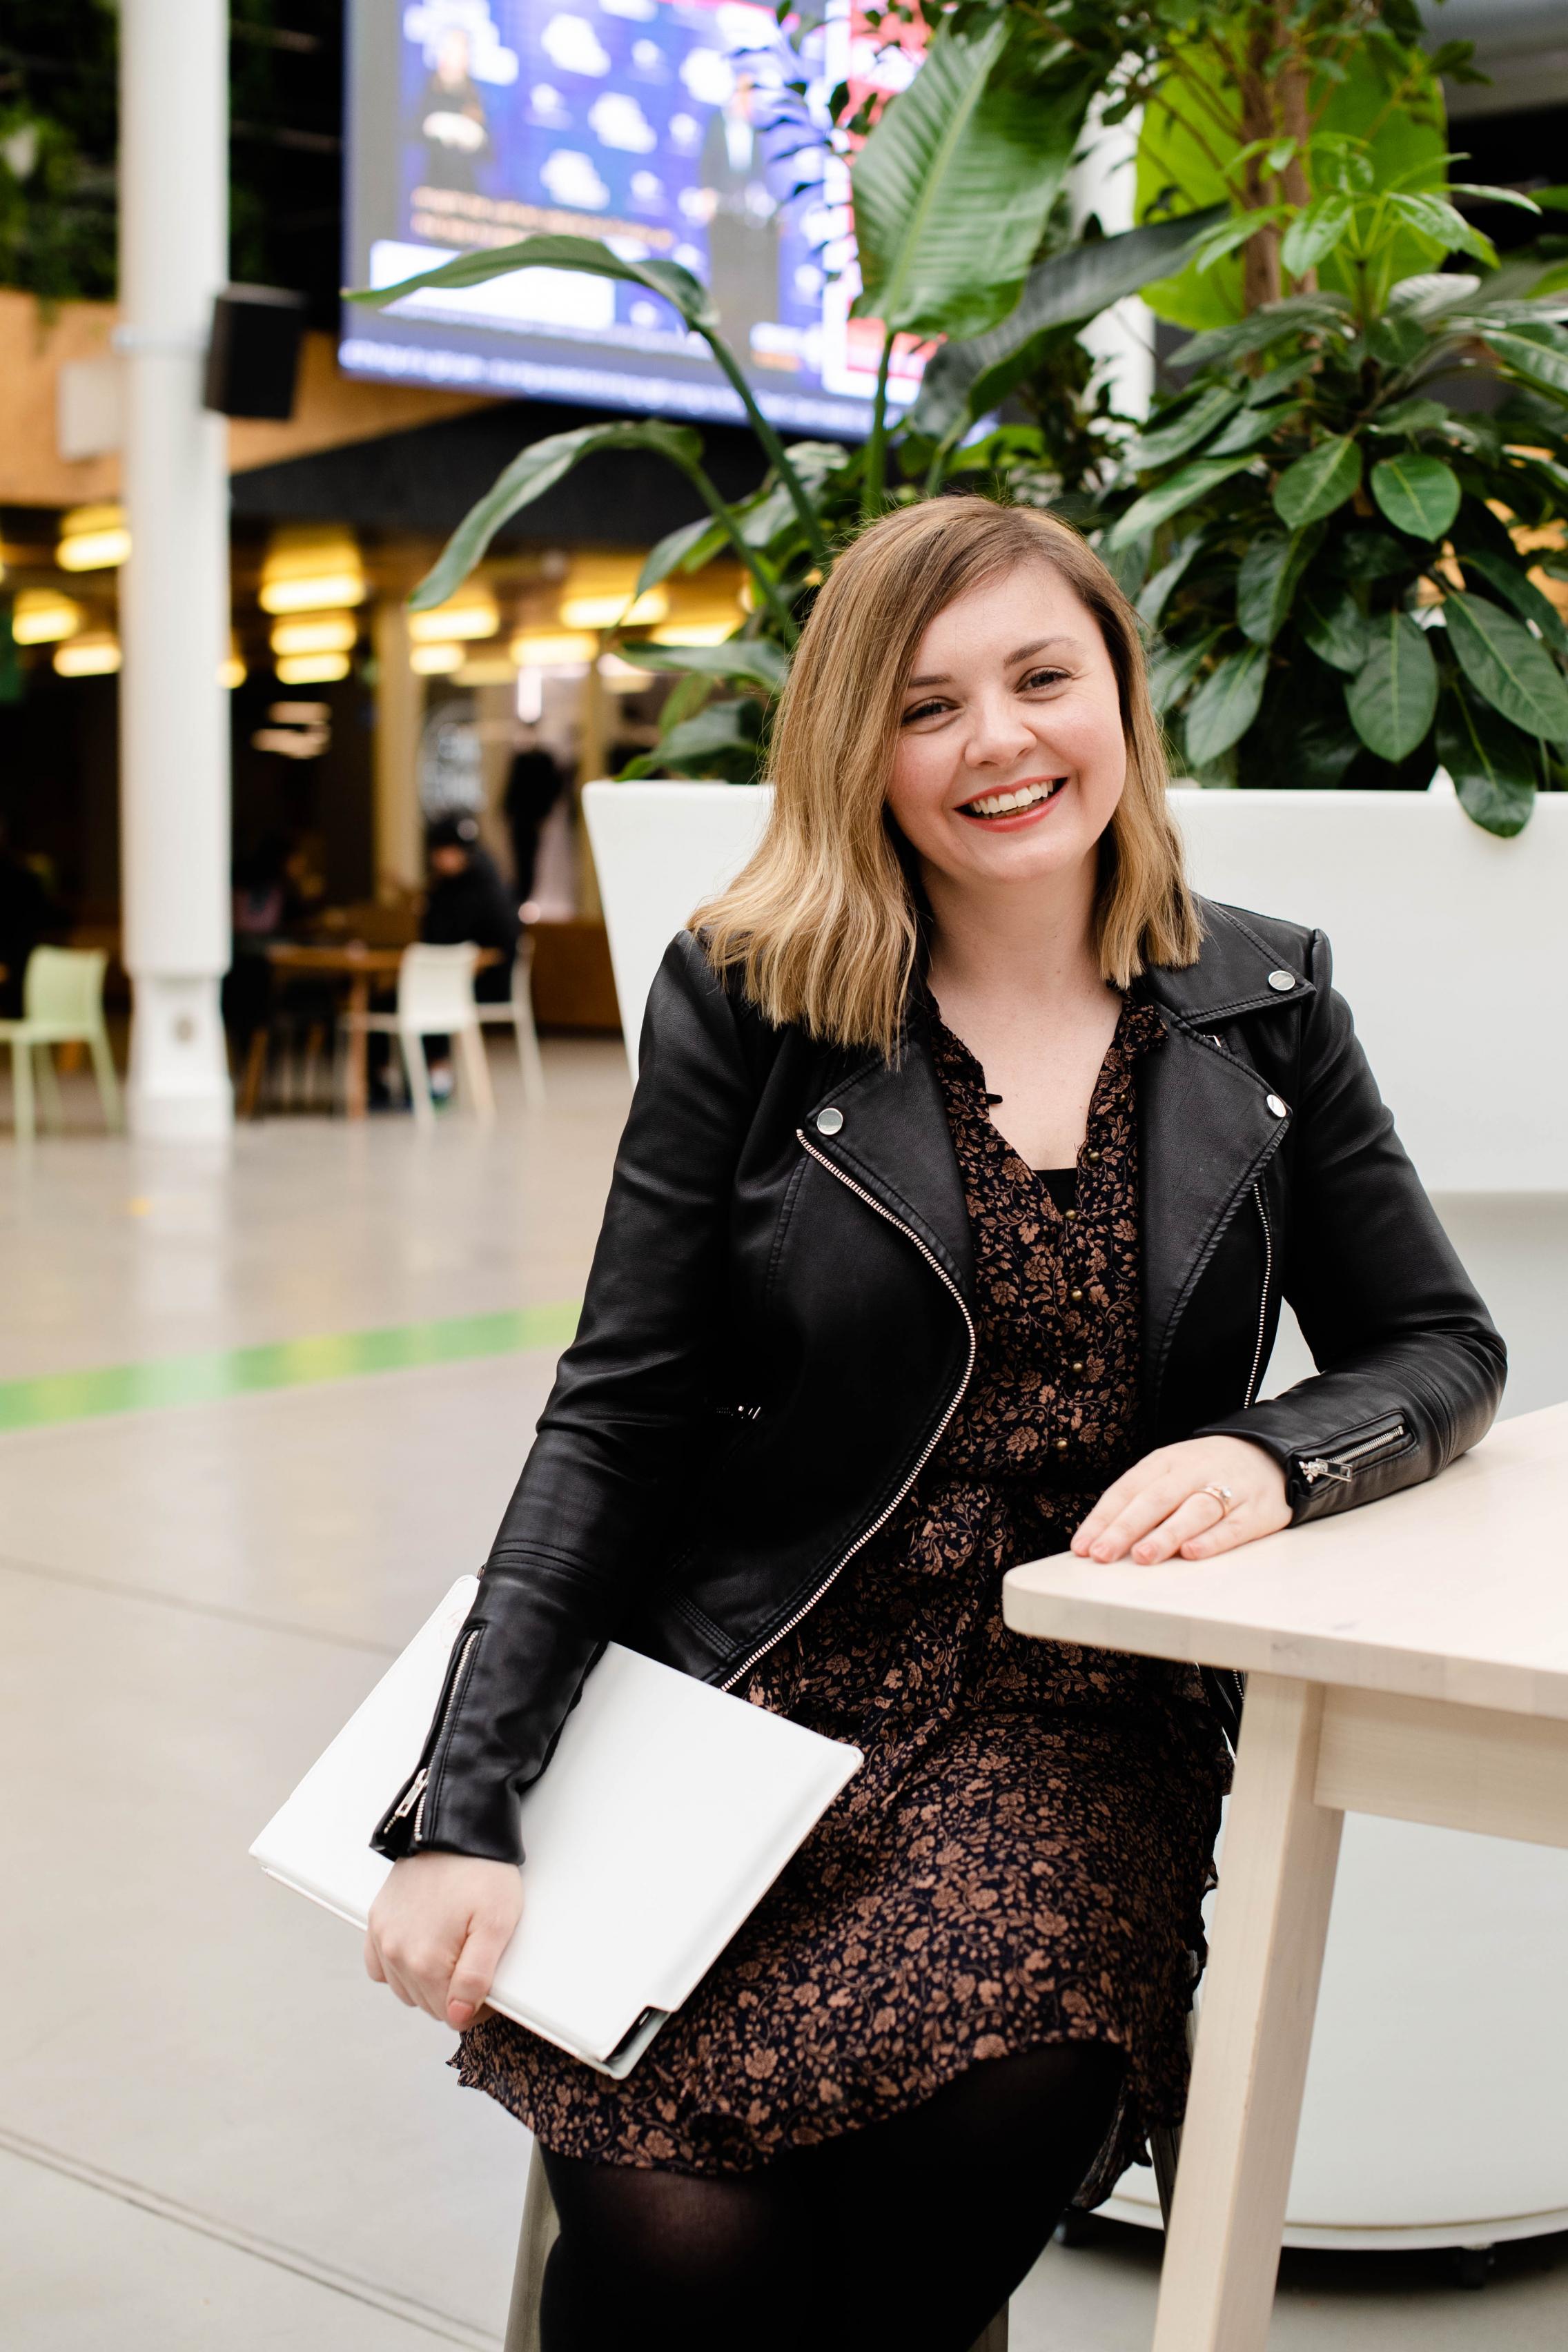 Image of Amelia sitting at a bench in the University of Adelaide Hub.